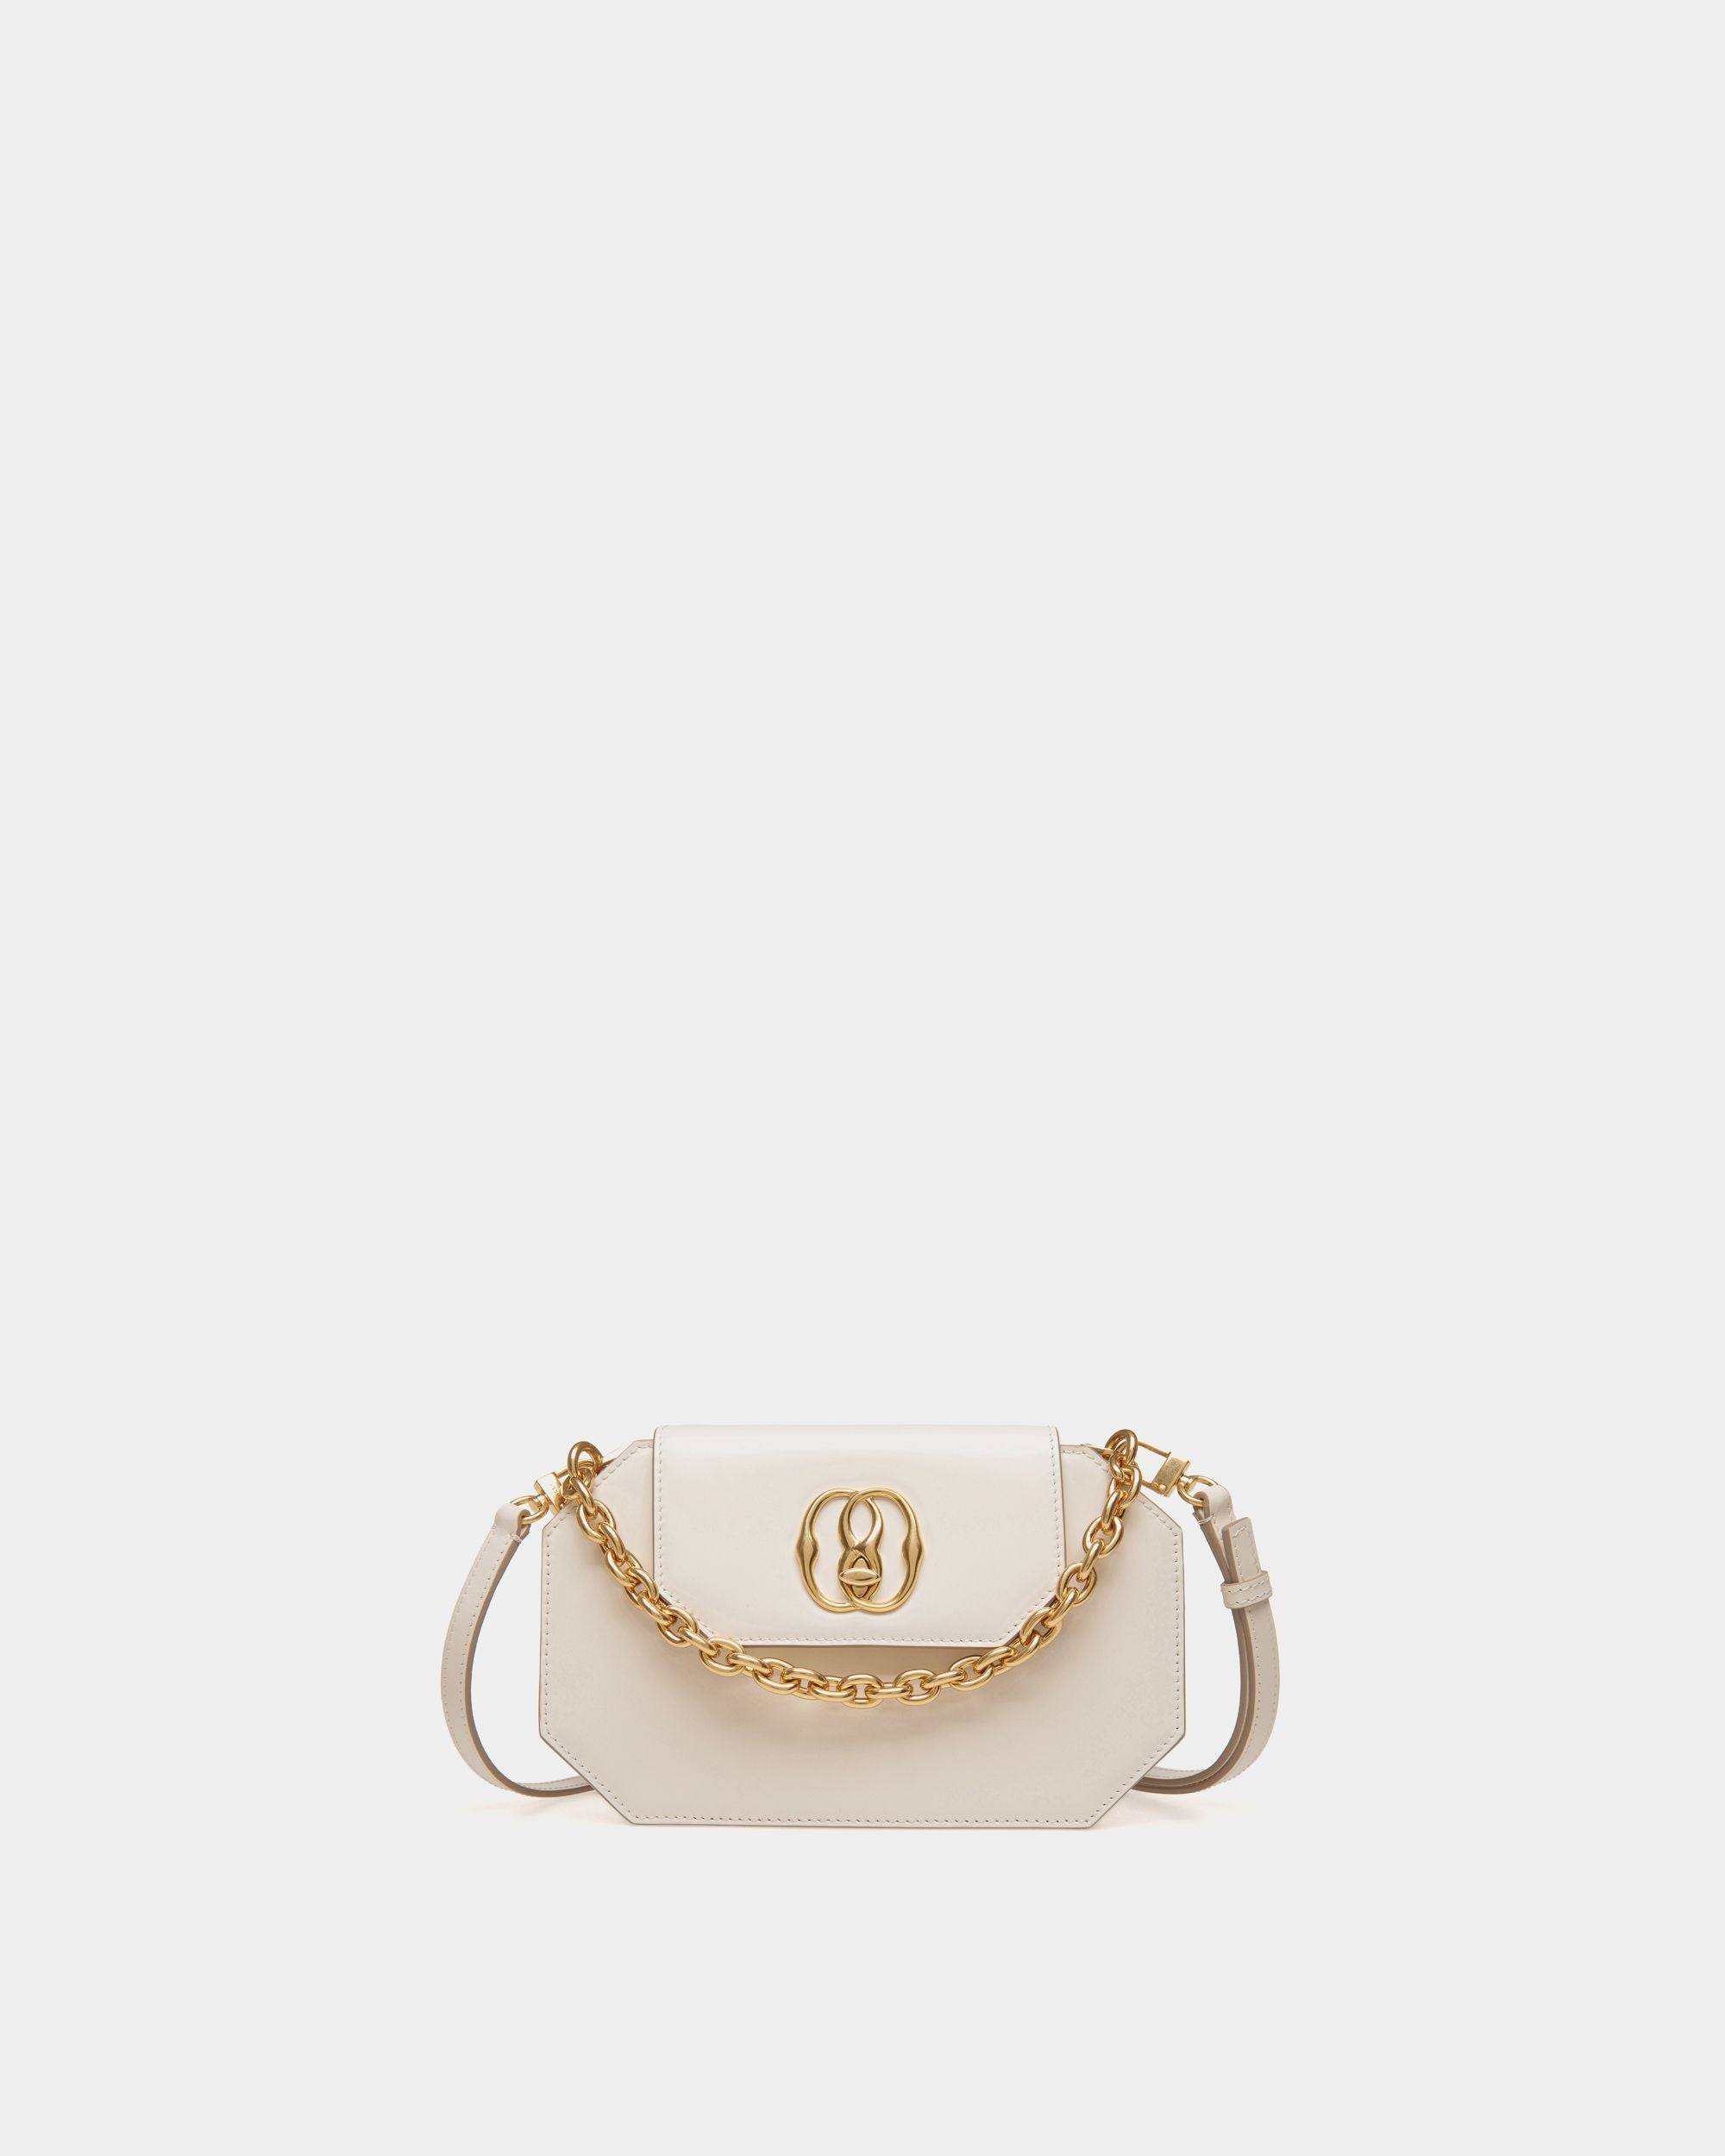 Women's Emblem Mini Bag in White Patent Leather | Bally | Still Life Front